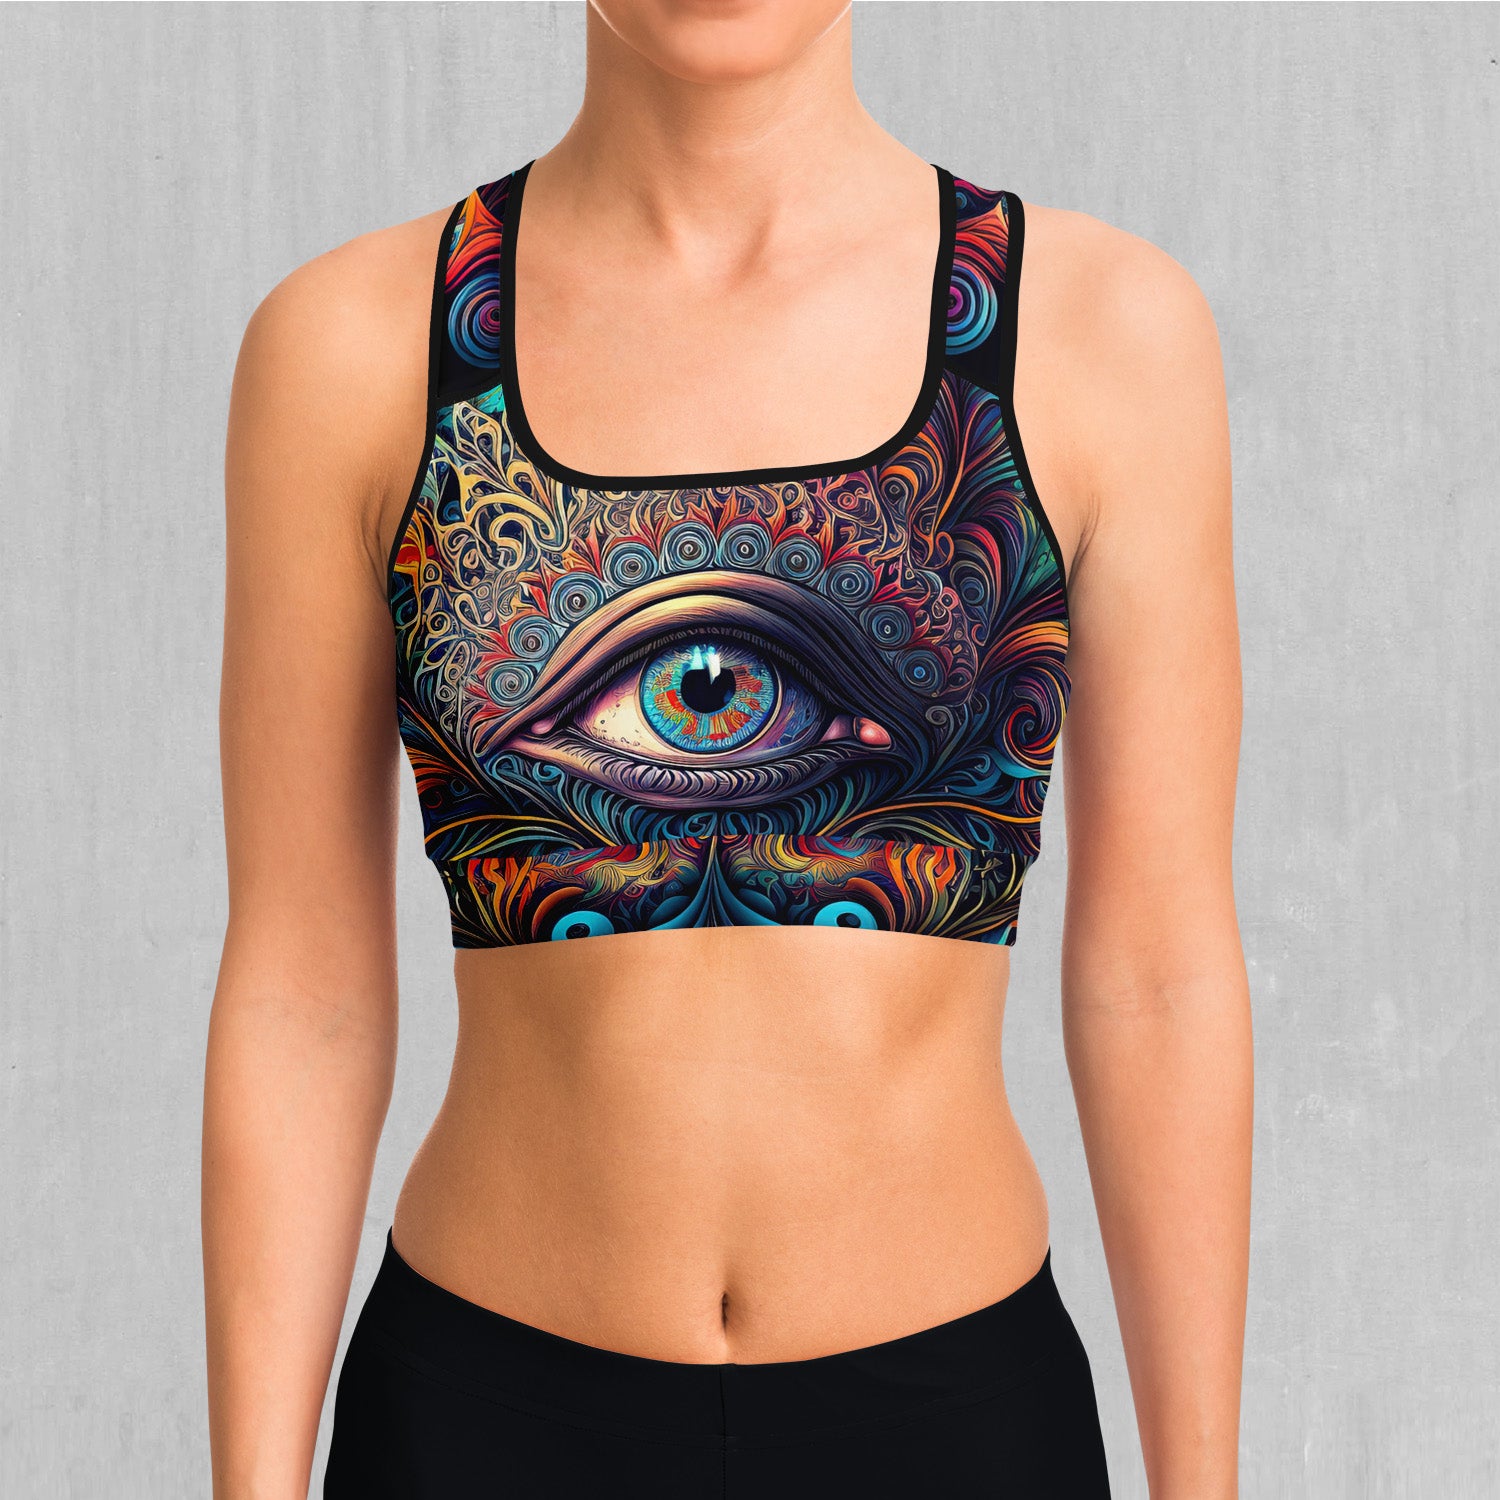 Rave Bras and Festival Bras - Azimuth Clothing